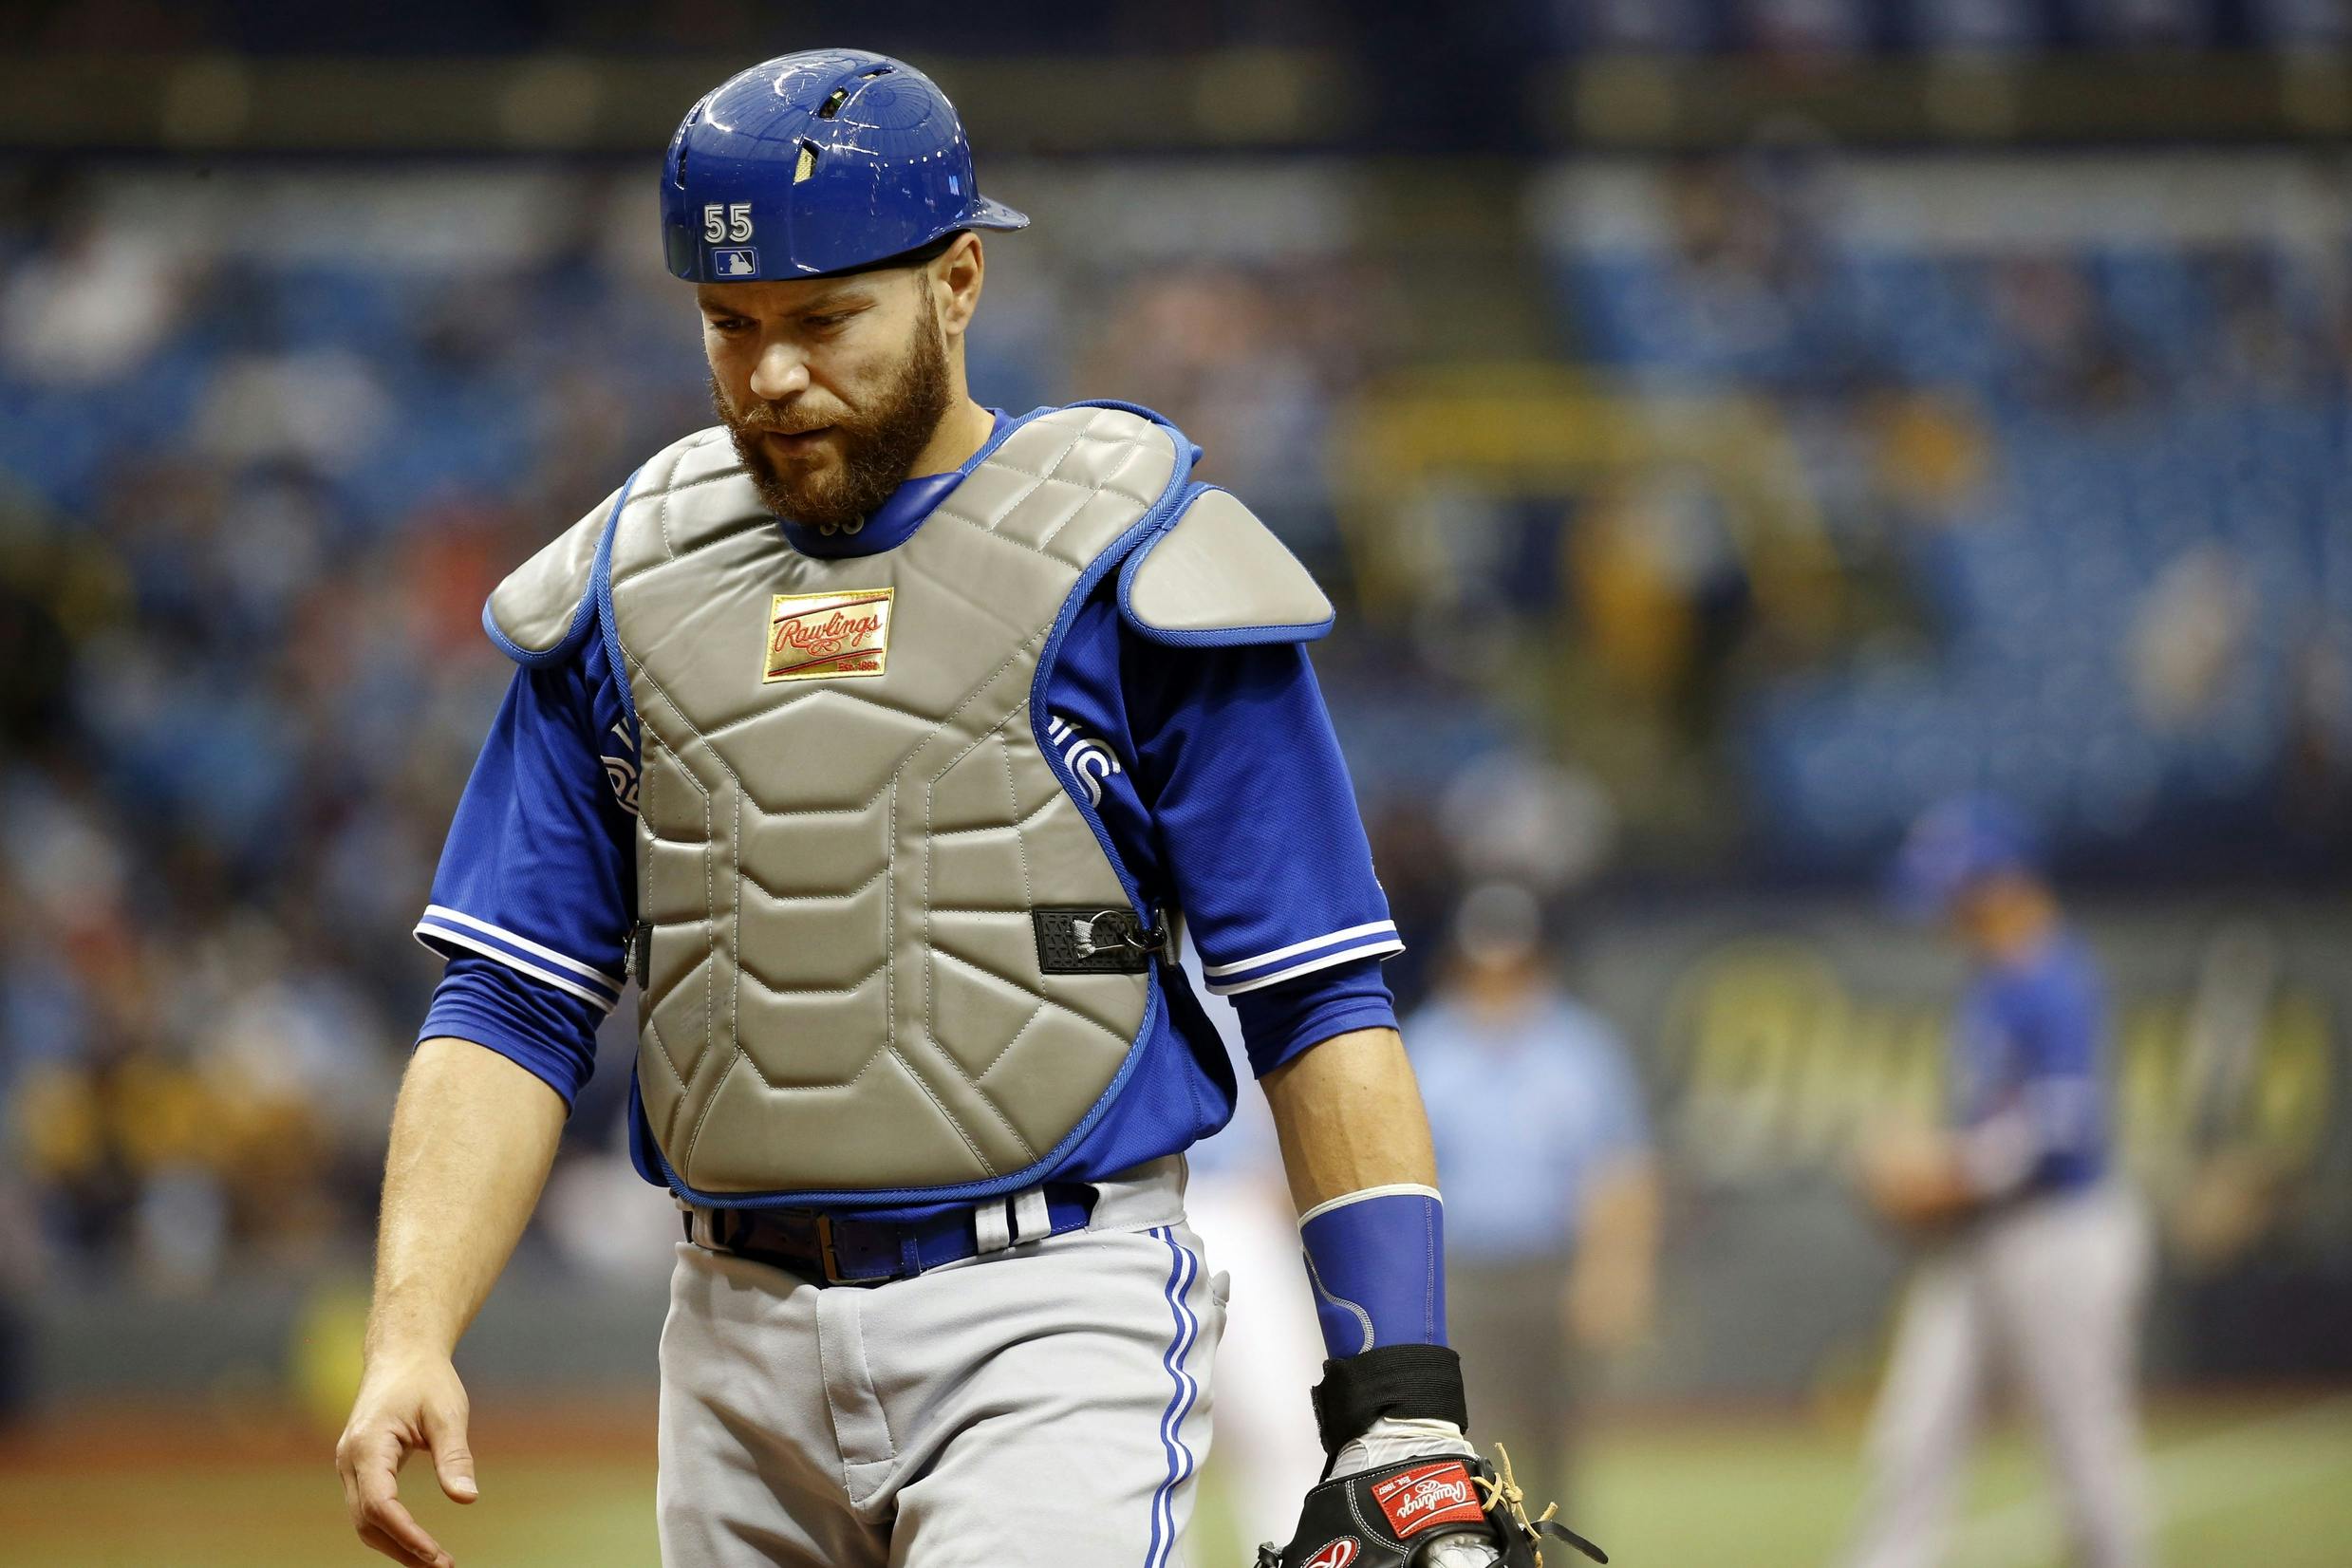 Dodgers Acquire Russell Martin in Trade with the Blue Jays